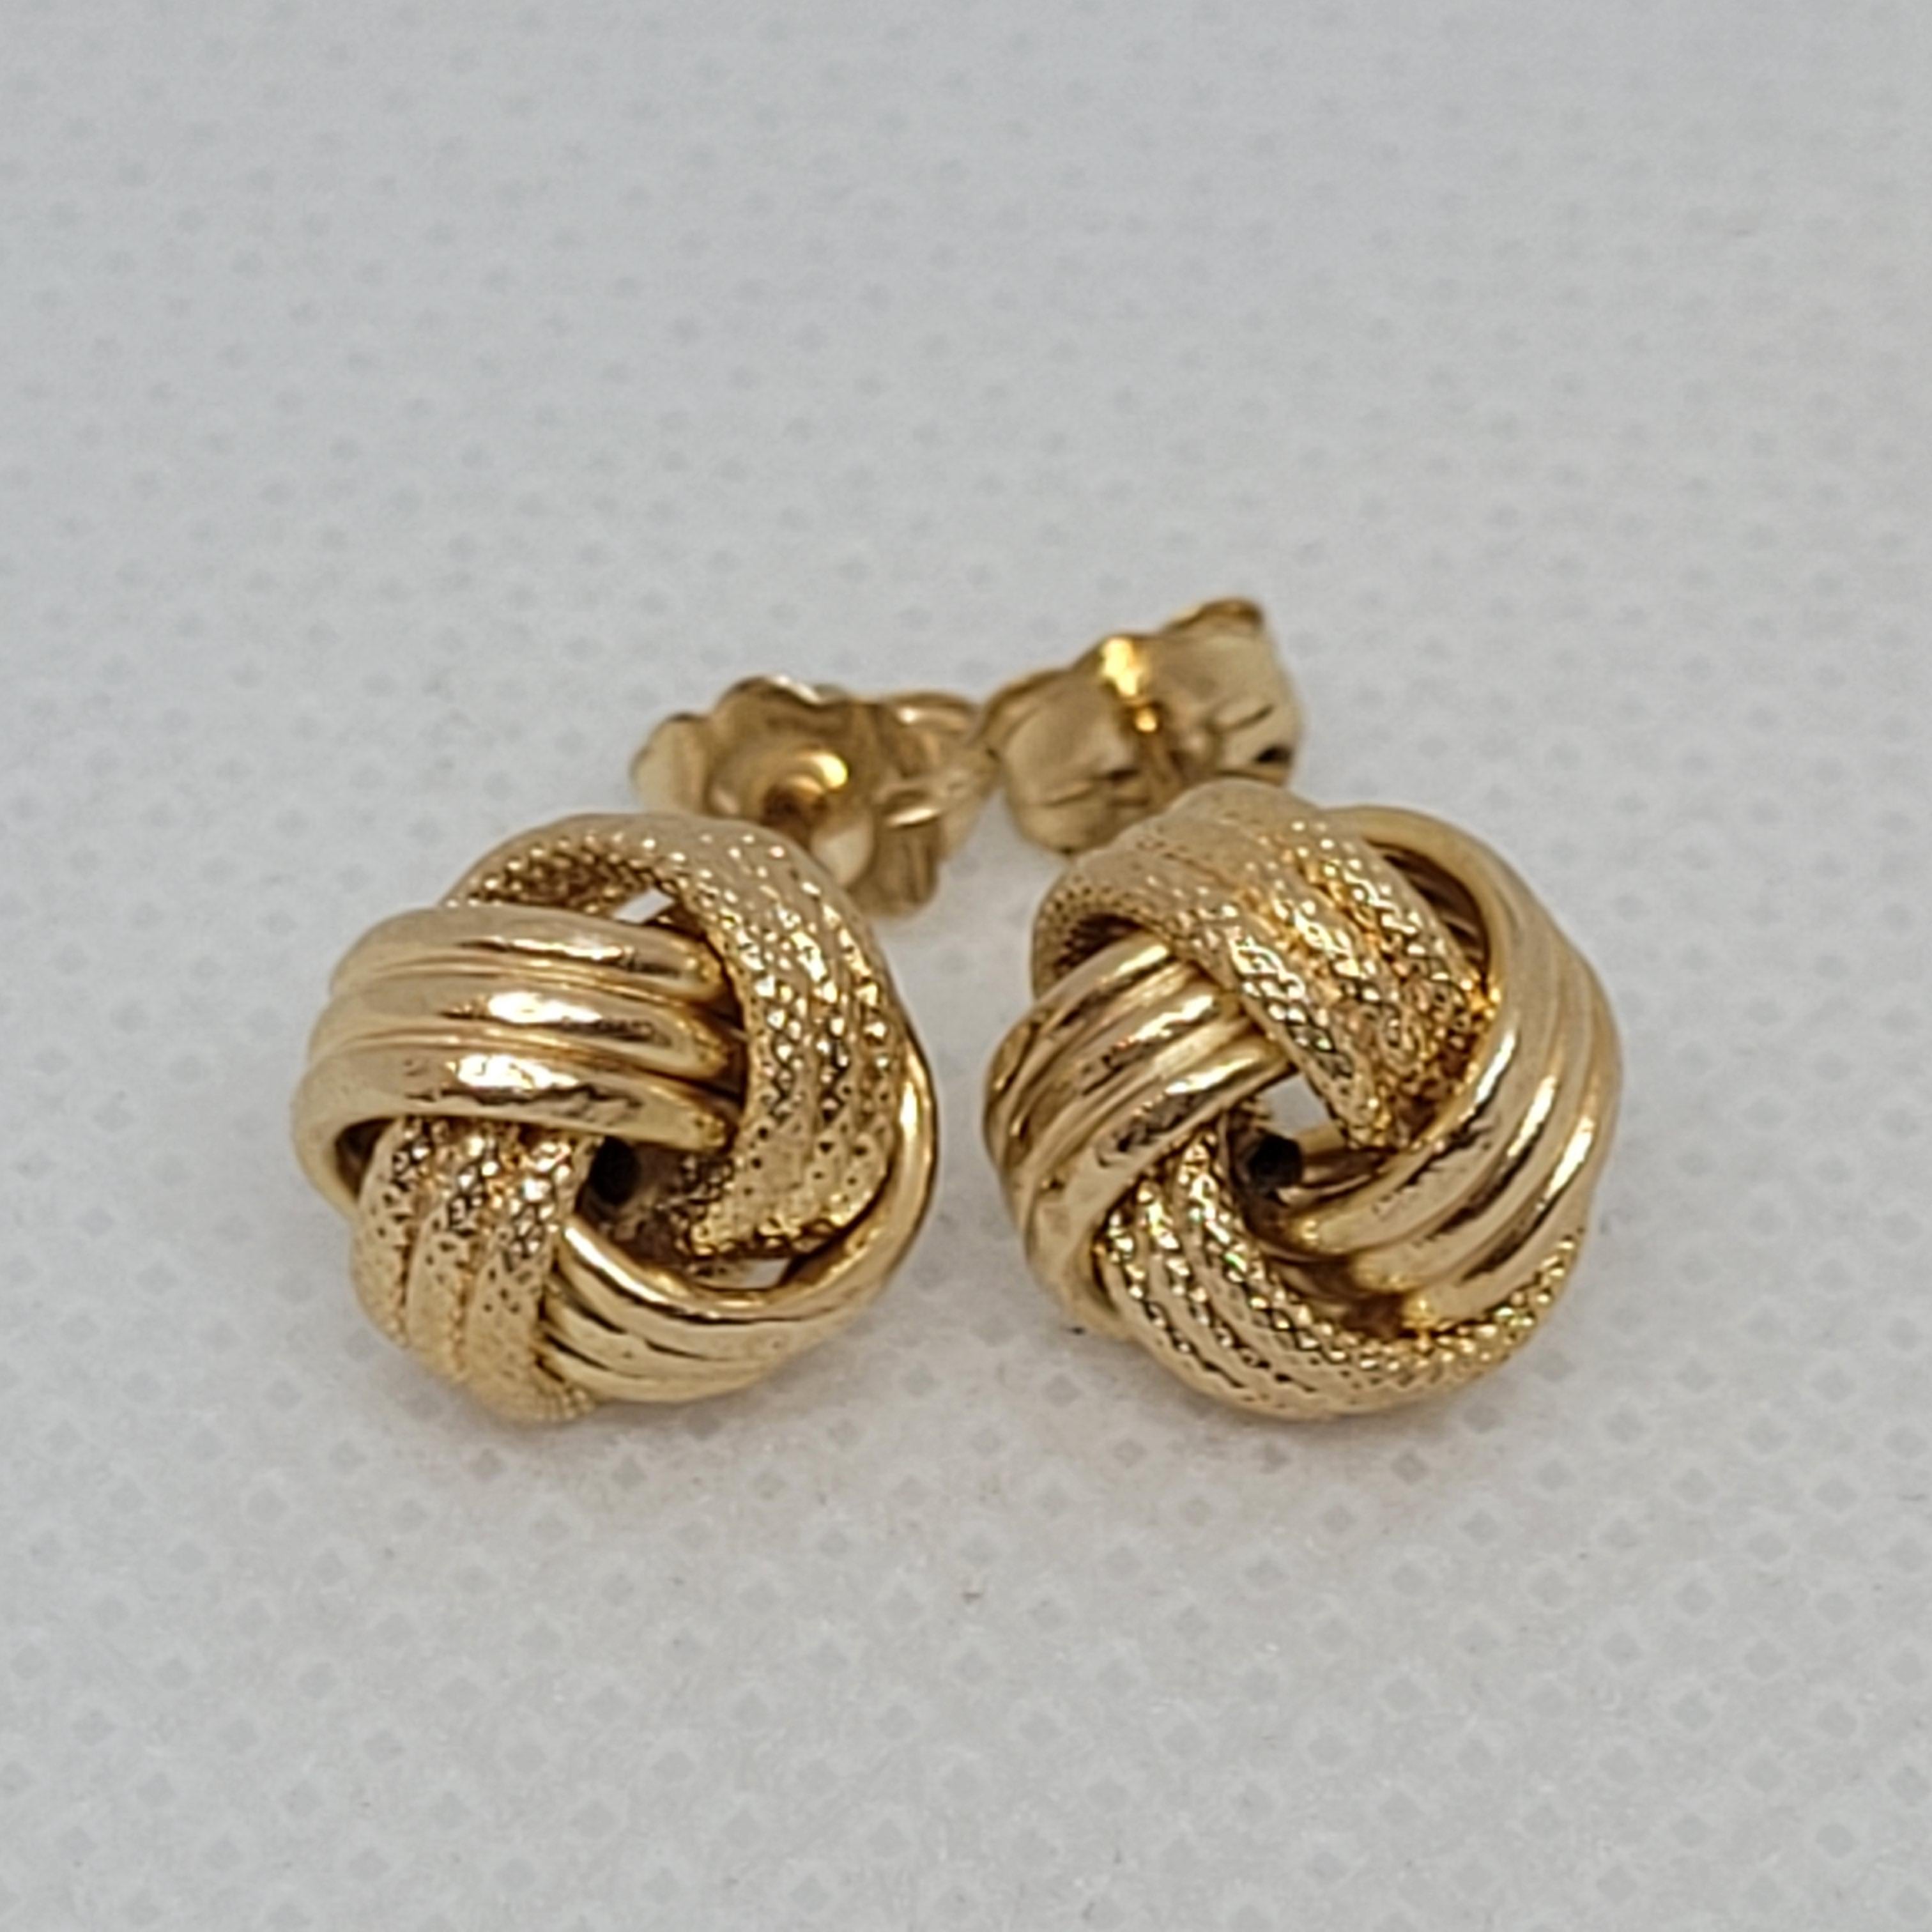 14kt Yellow Gold Knot Earrings, Friction Post with Push-On Backings, .7 Grams 1